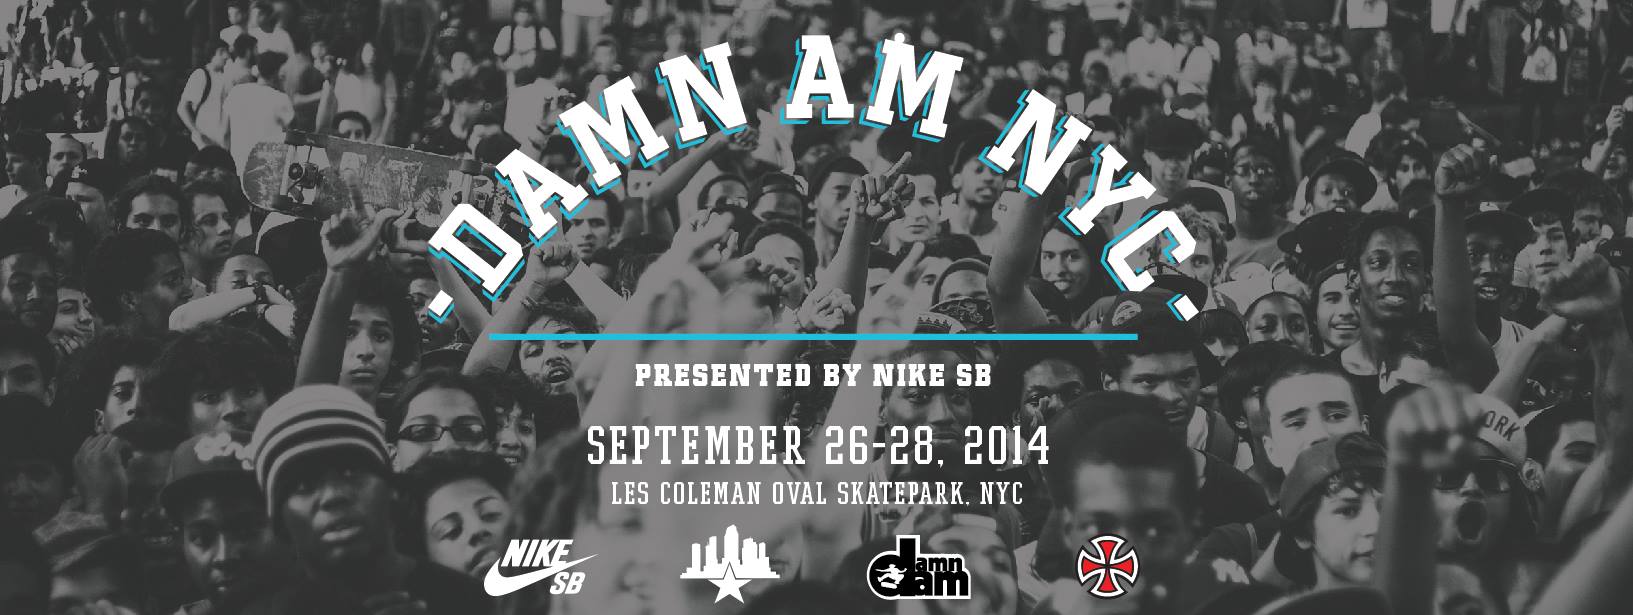 DAMN AM NYC Contest This Weekend (2014)